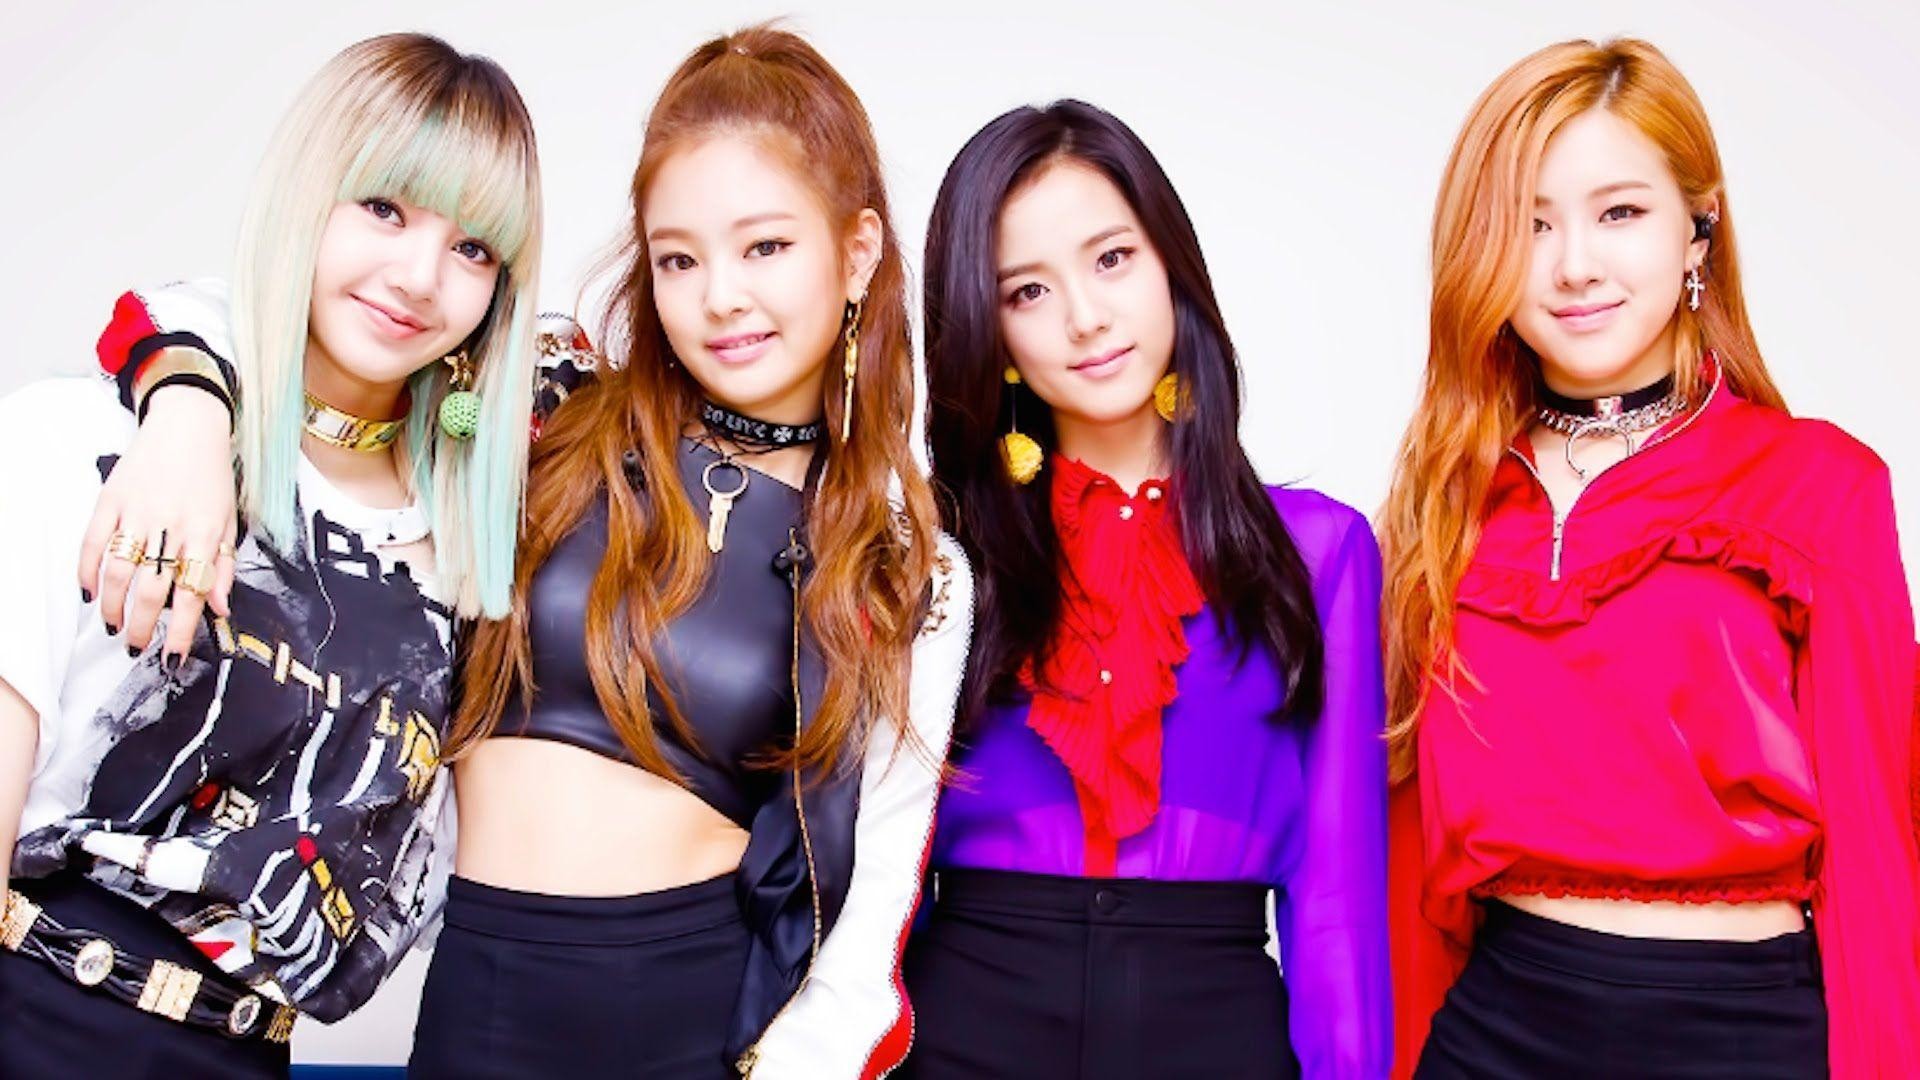 Best Blackpink Wallpaper HD with high-resolution 1920x1080 pixel. You can use this wallpaper for your Desktop Computer Backgrounds, Mac Wallpapers, Android Lock screen or iPhone Screensavers and another smartphone device